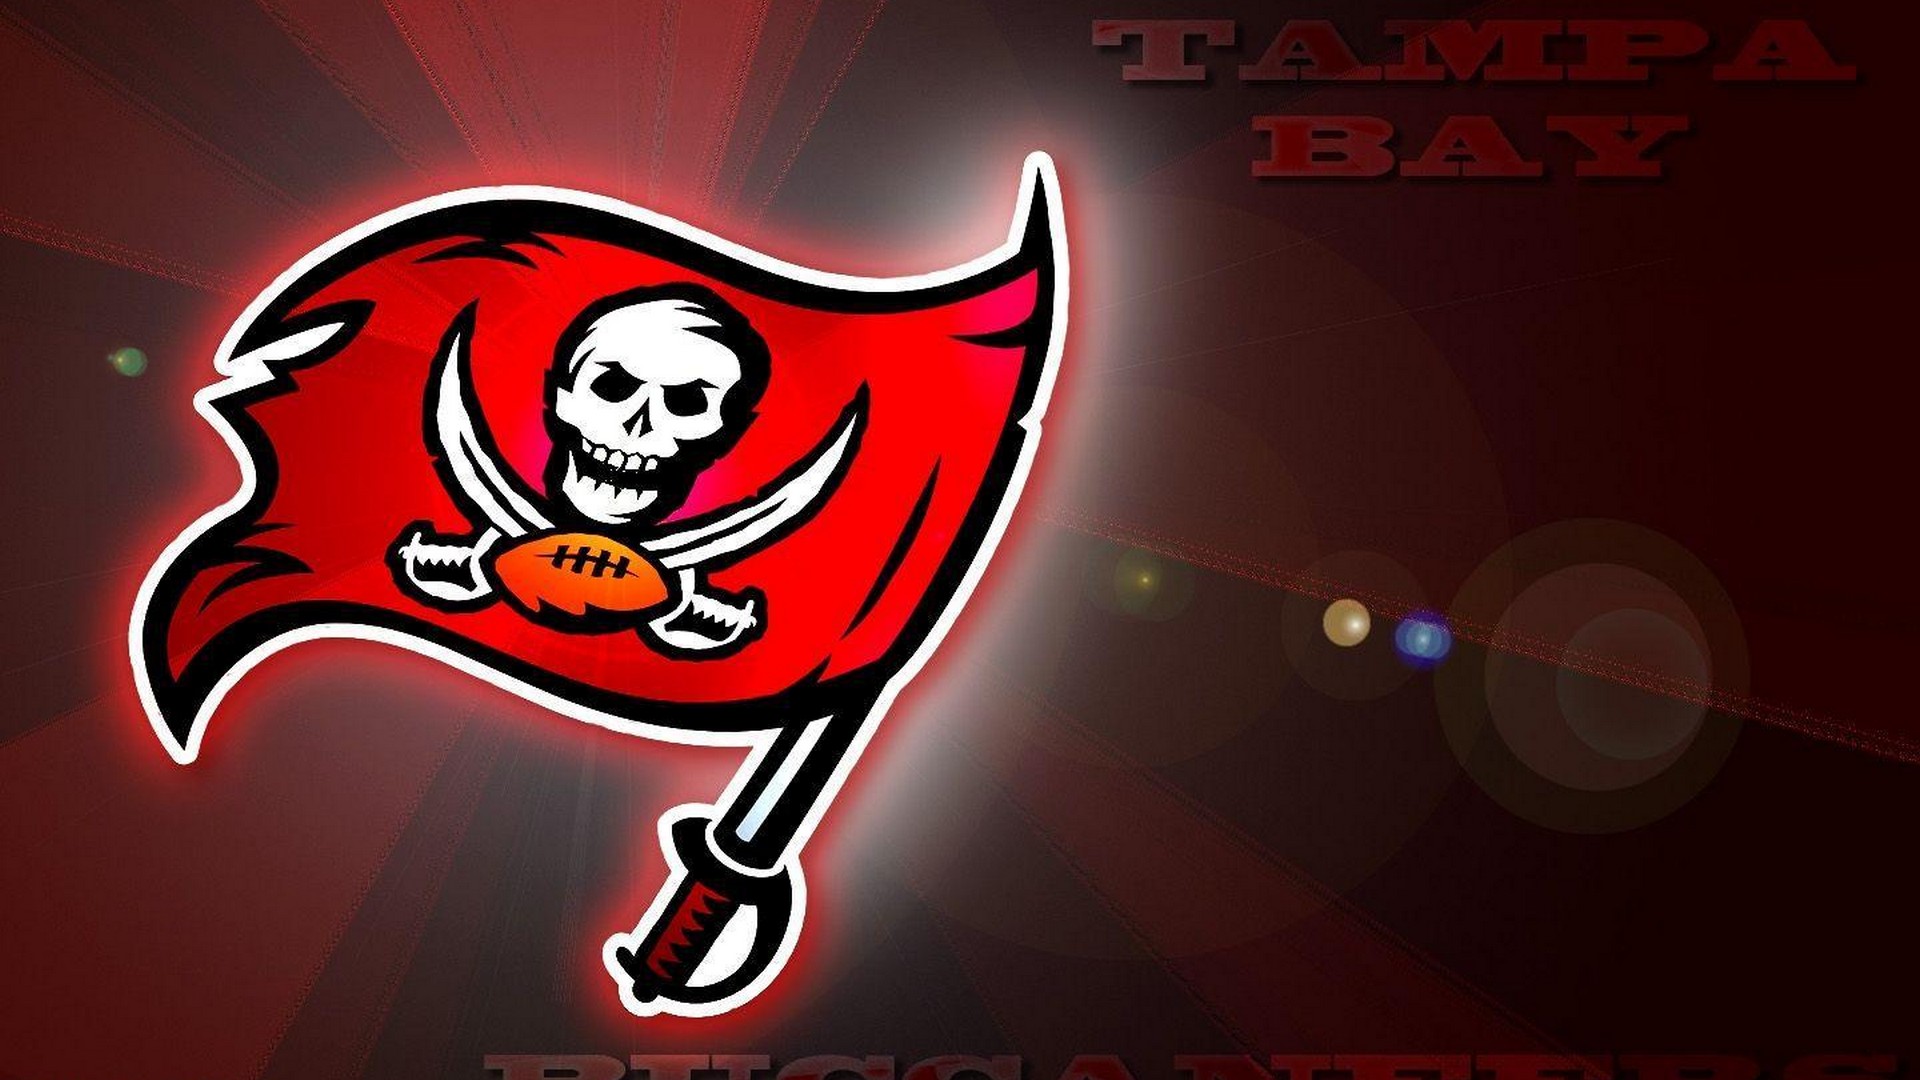 HD Tampa Bay Buccaneers Wallpapers With high-resolution 1920X1080 pixel. You can use this wallpaper for your Mac or Windows Desktop Background, iPhone, Android or Tablet and another Smartphone device